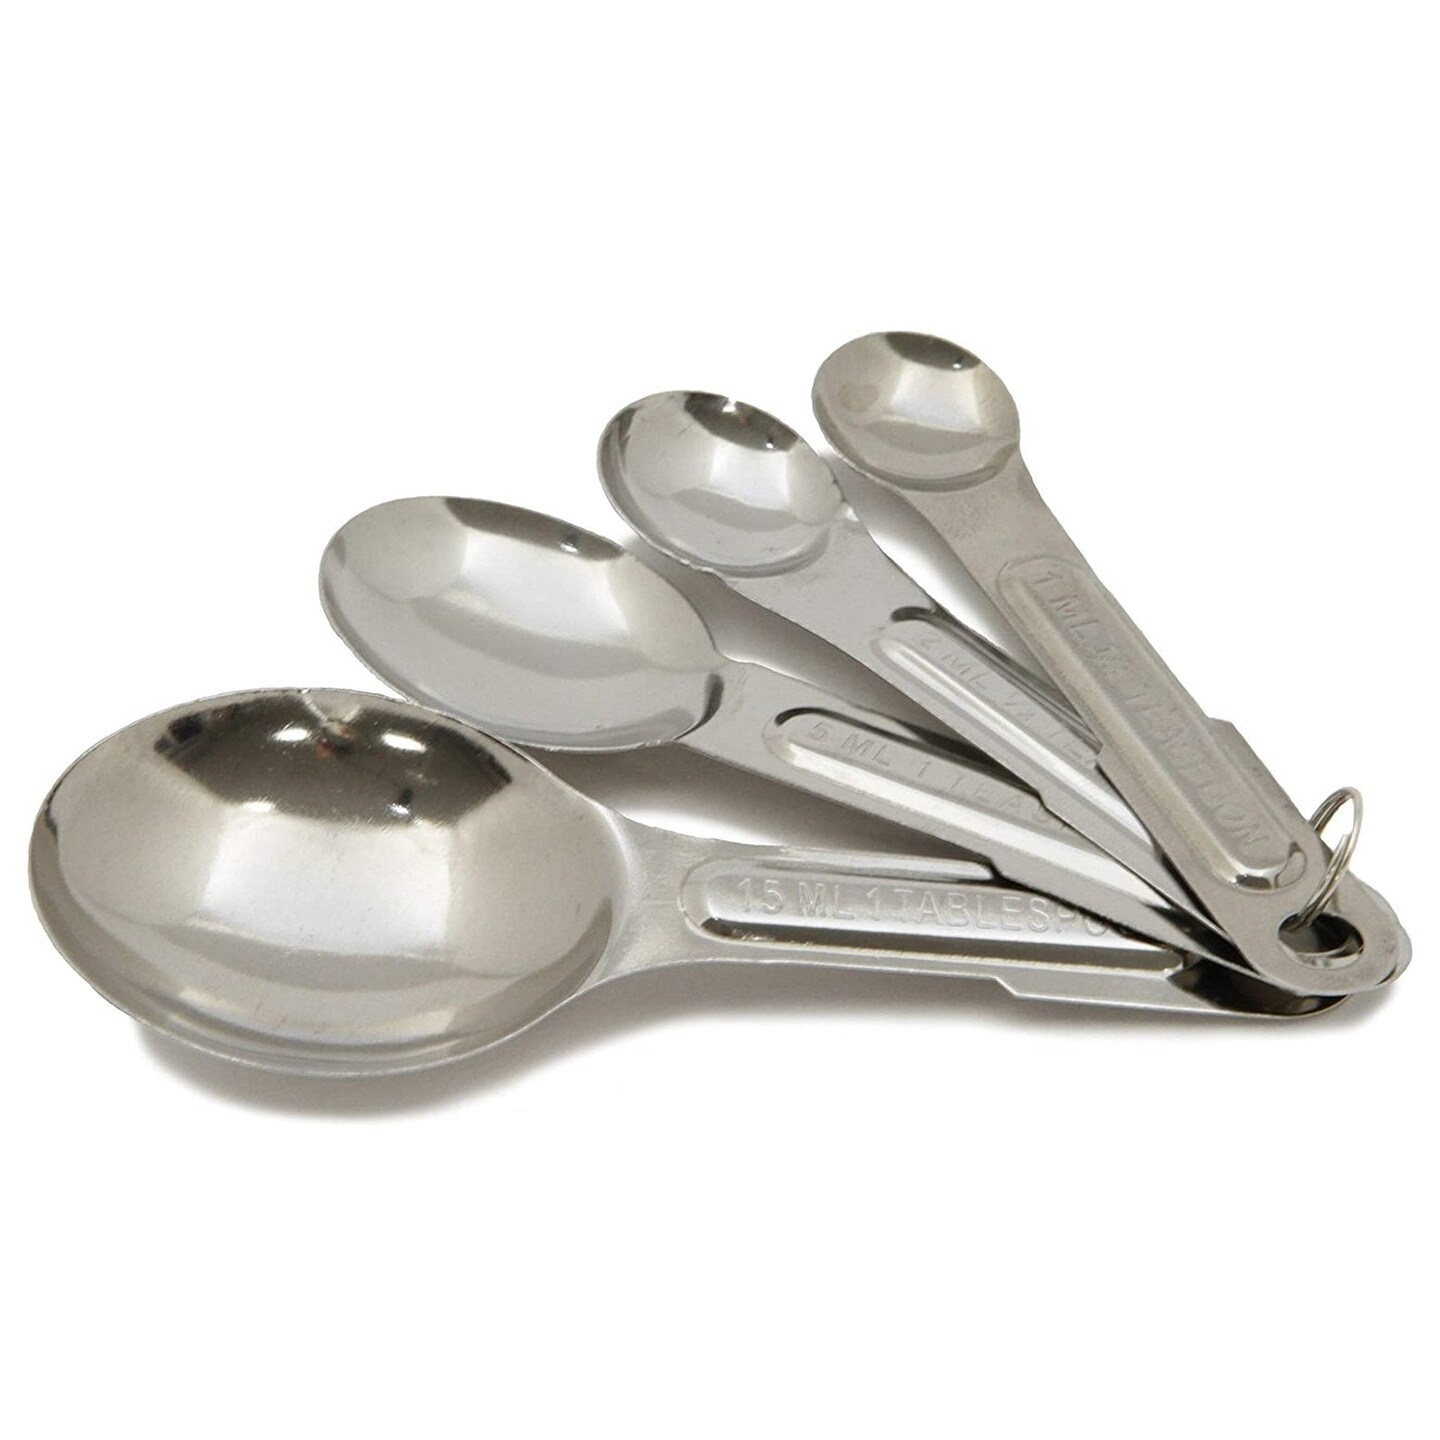 Measuring Spoons Stainless Steel Teaspoon And Tablespoons